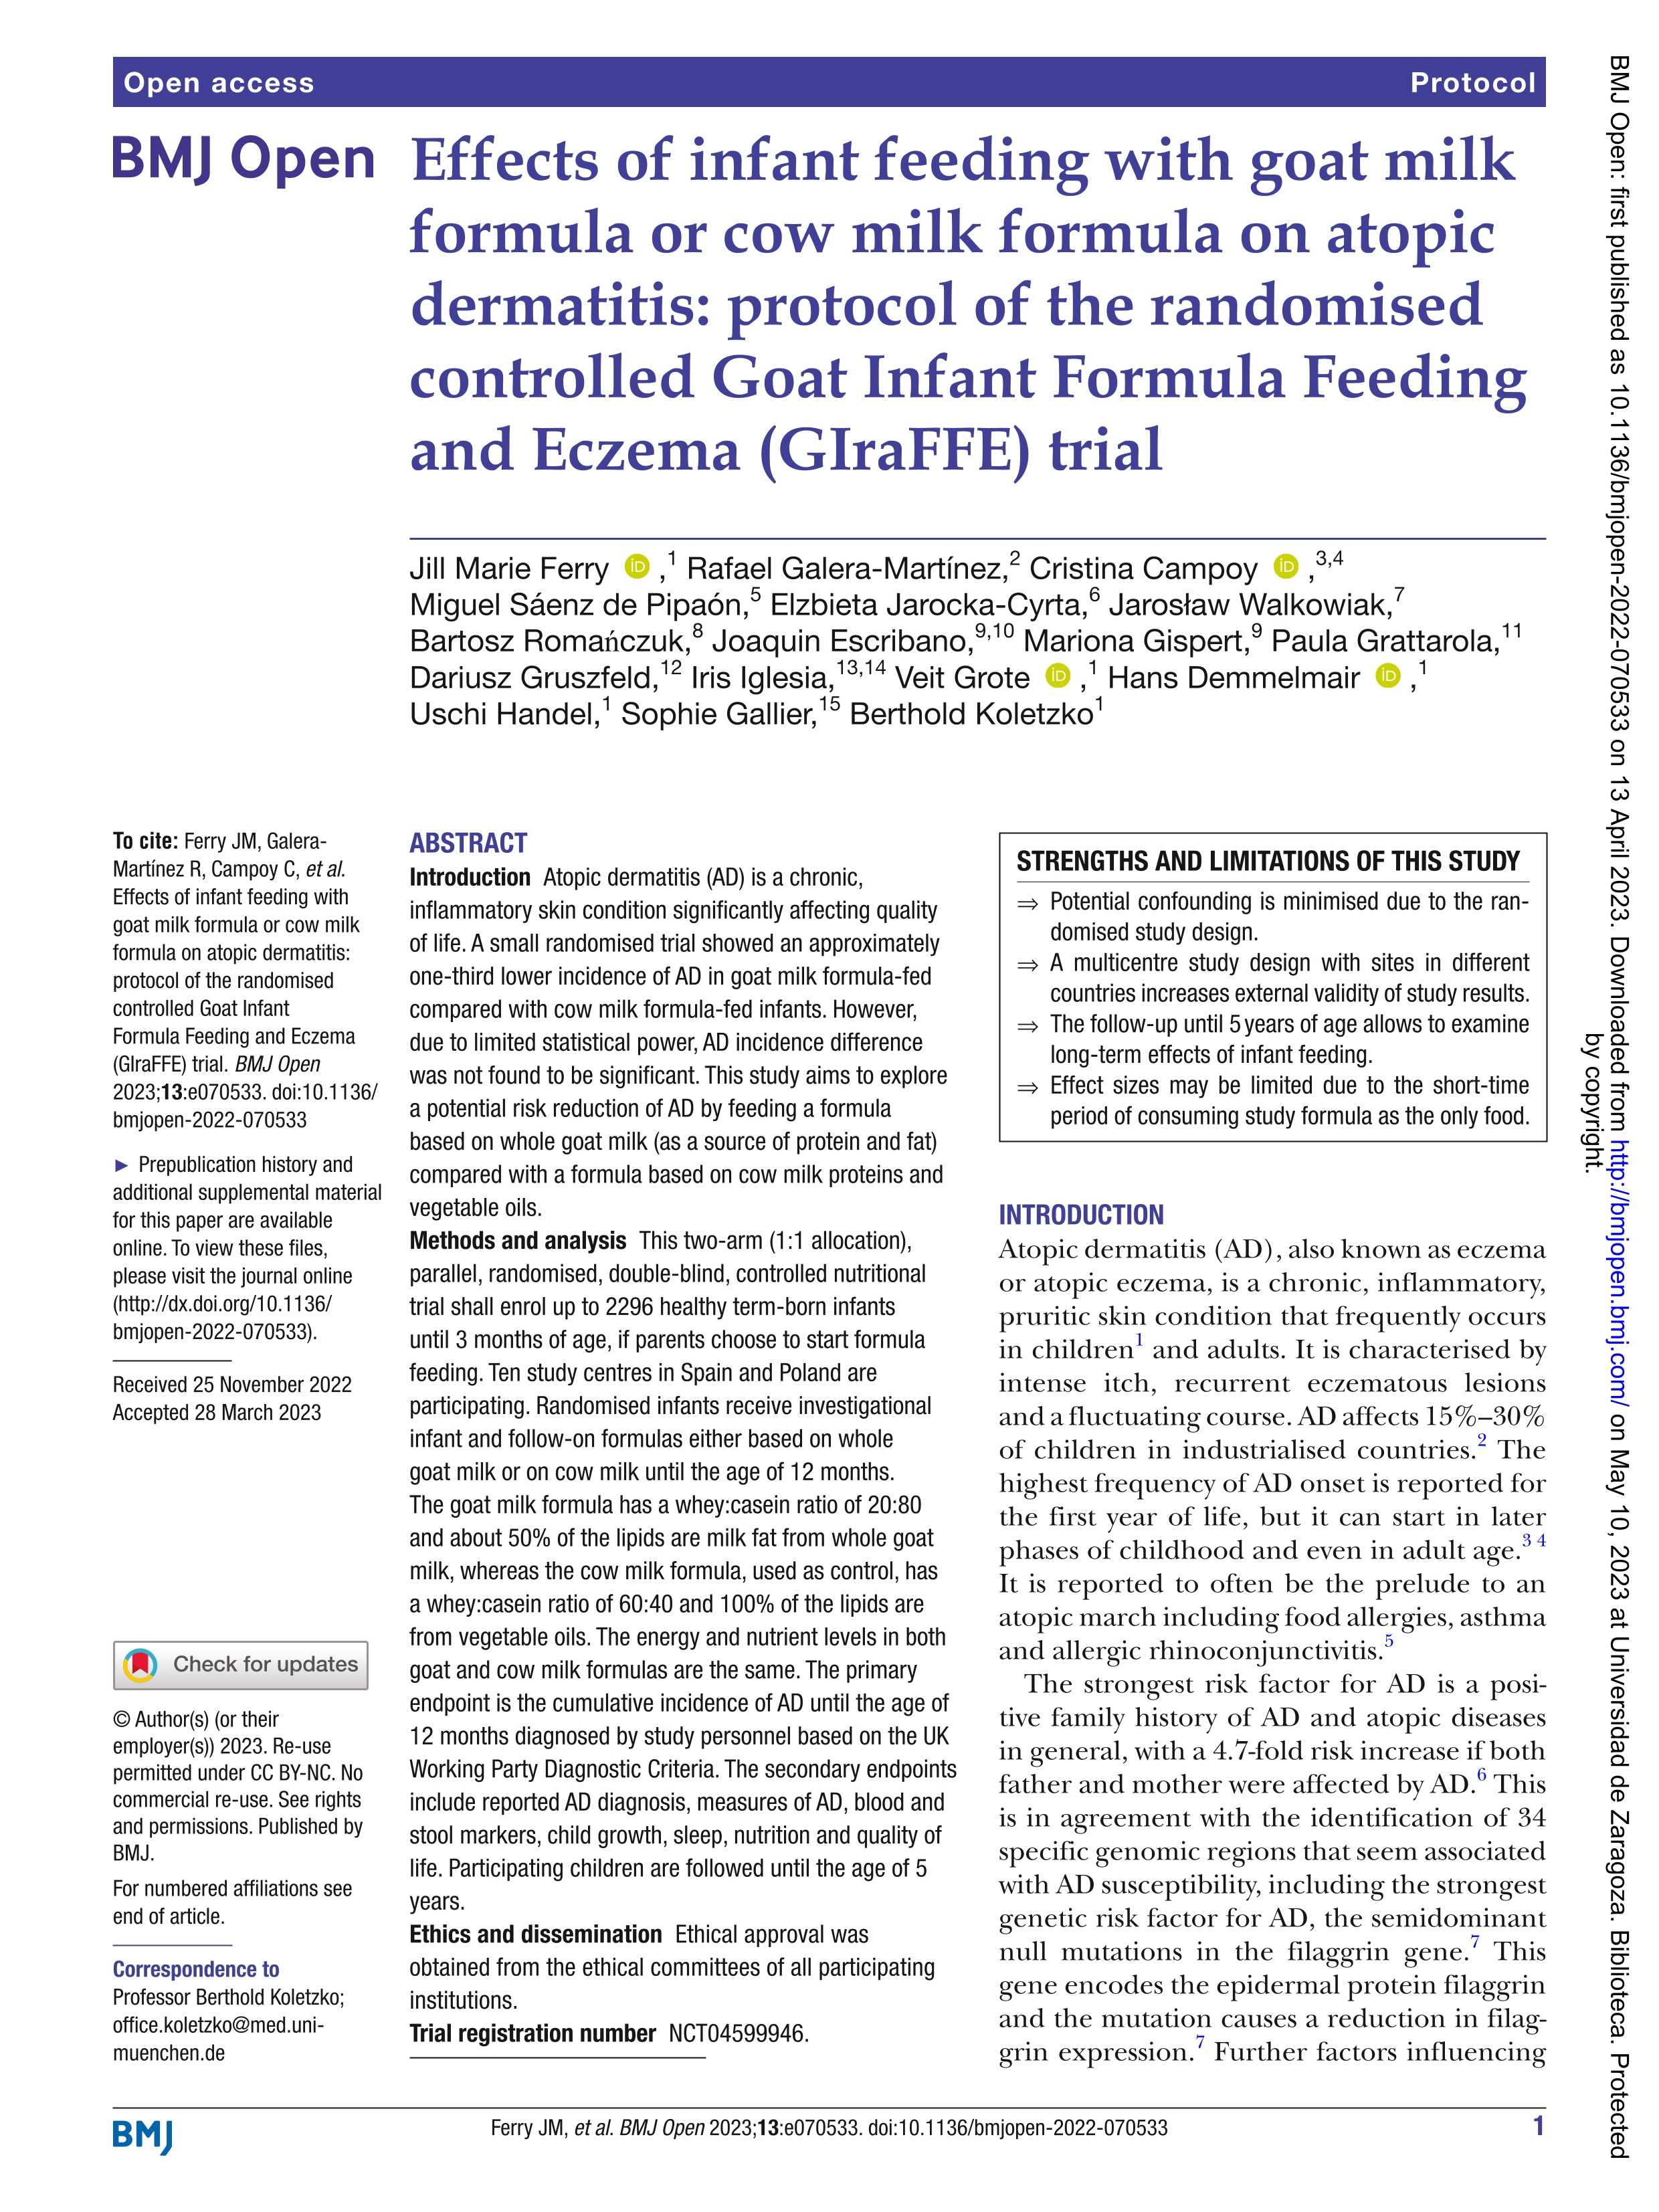 Effects of infant feeding with goat milk formula or cow milk formula on atopic dermatitis: protocol of the randomised controlled Goat Infant Formula Feeding and Eczema (GIraFFE) trial